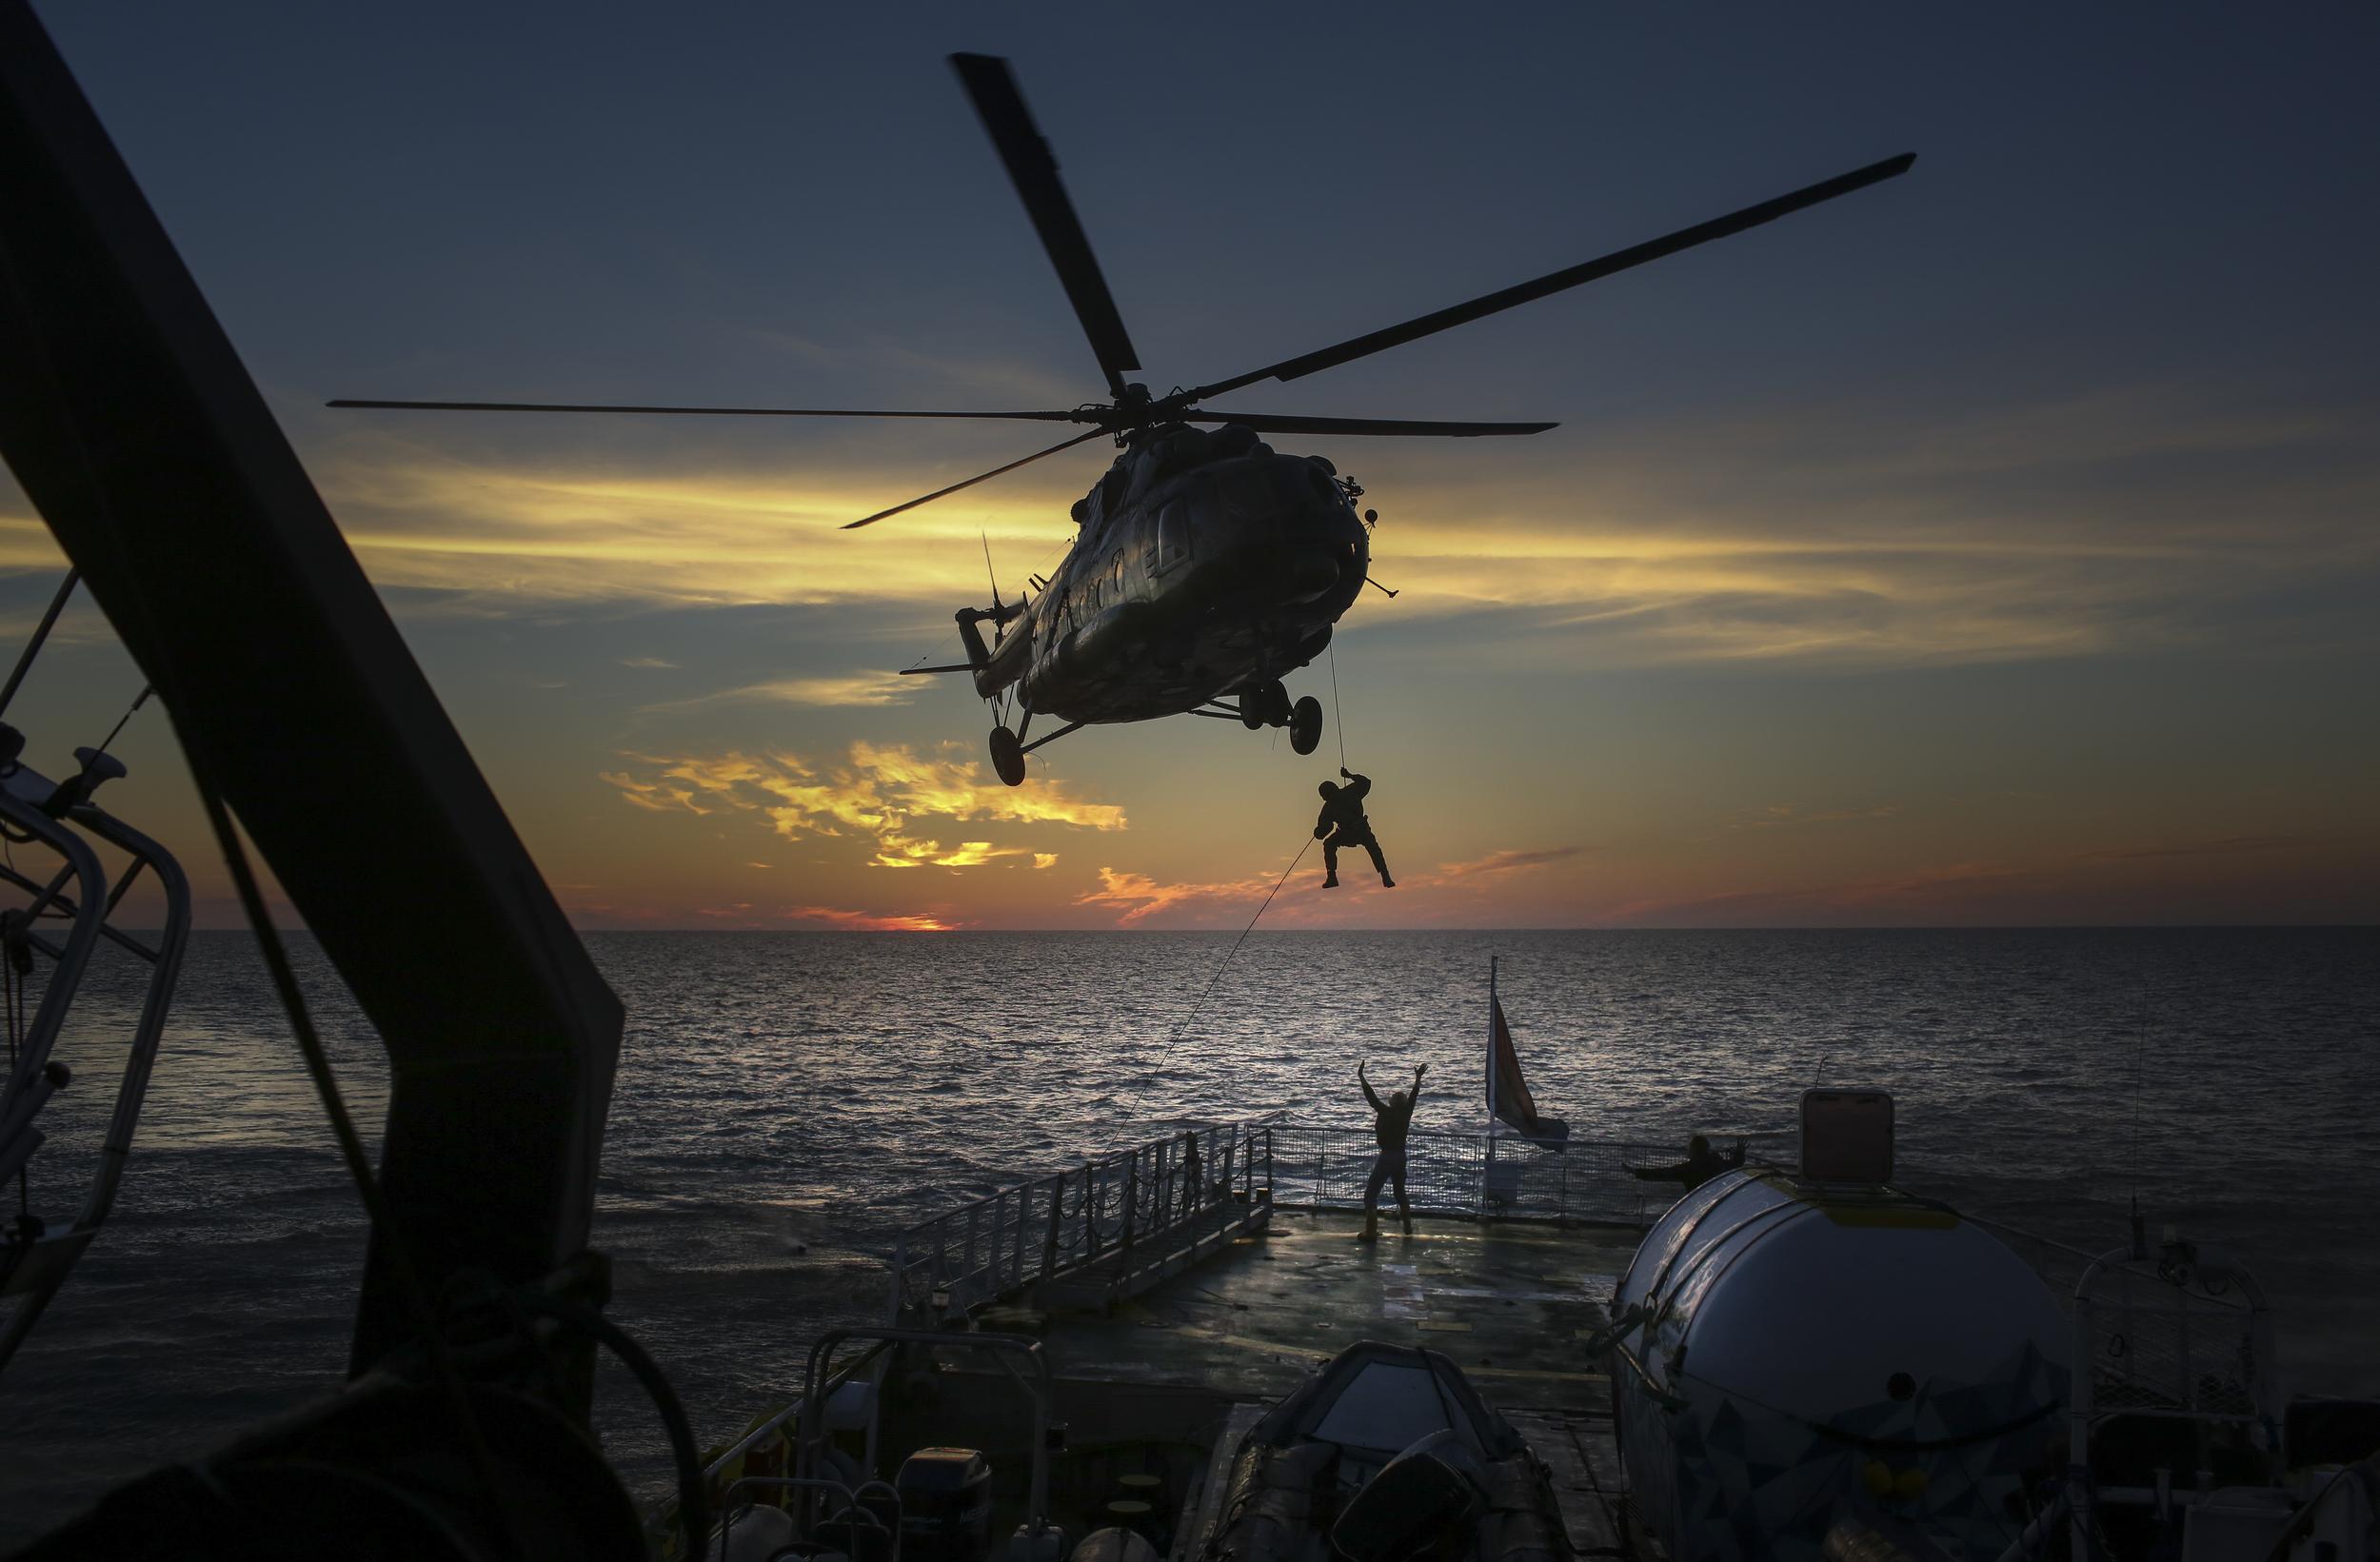 A helicopter is silhouetted against the dawn or dusk as it hovers low over the deck of a ship. A person is abseiling down onto the deck, where a crew member waves up at the helicopter with both hands.